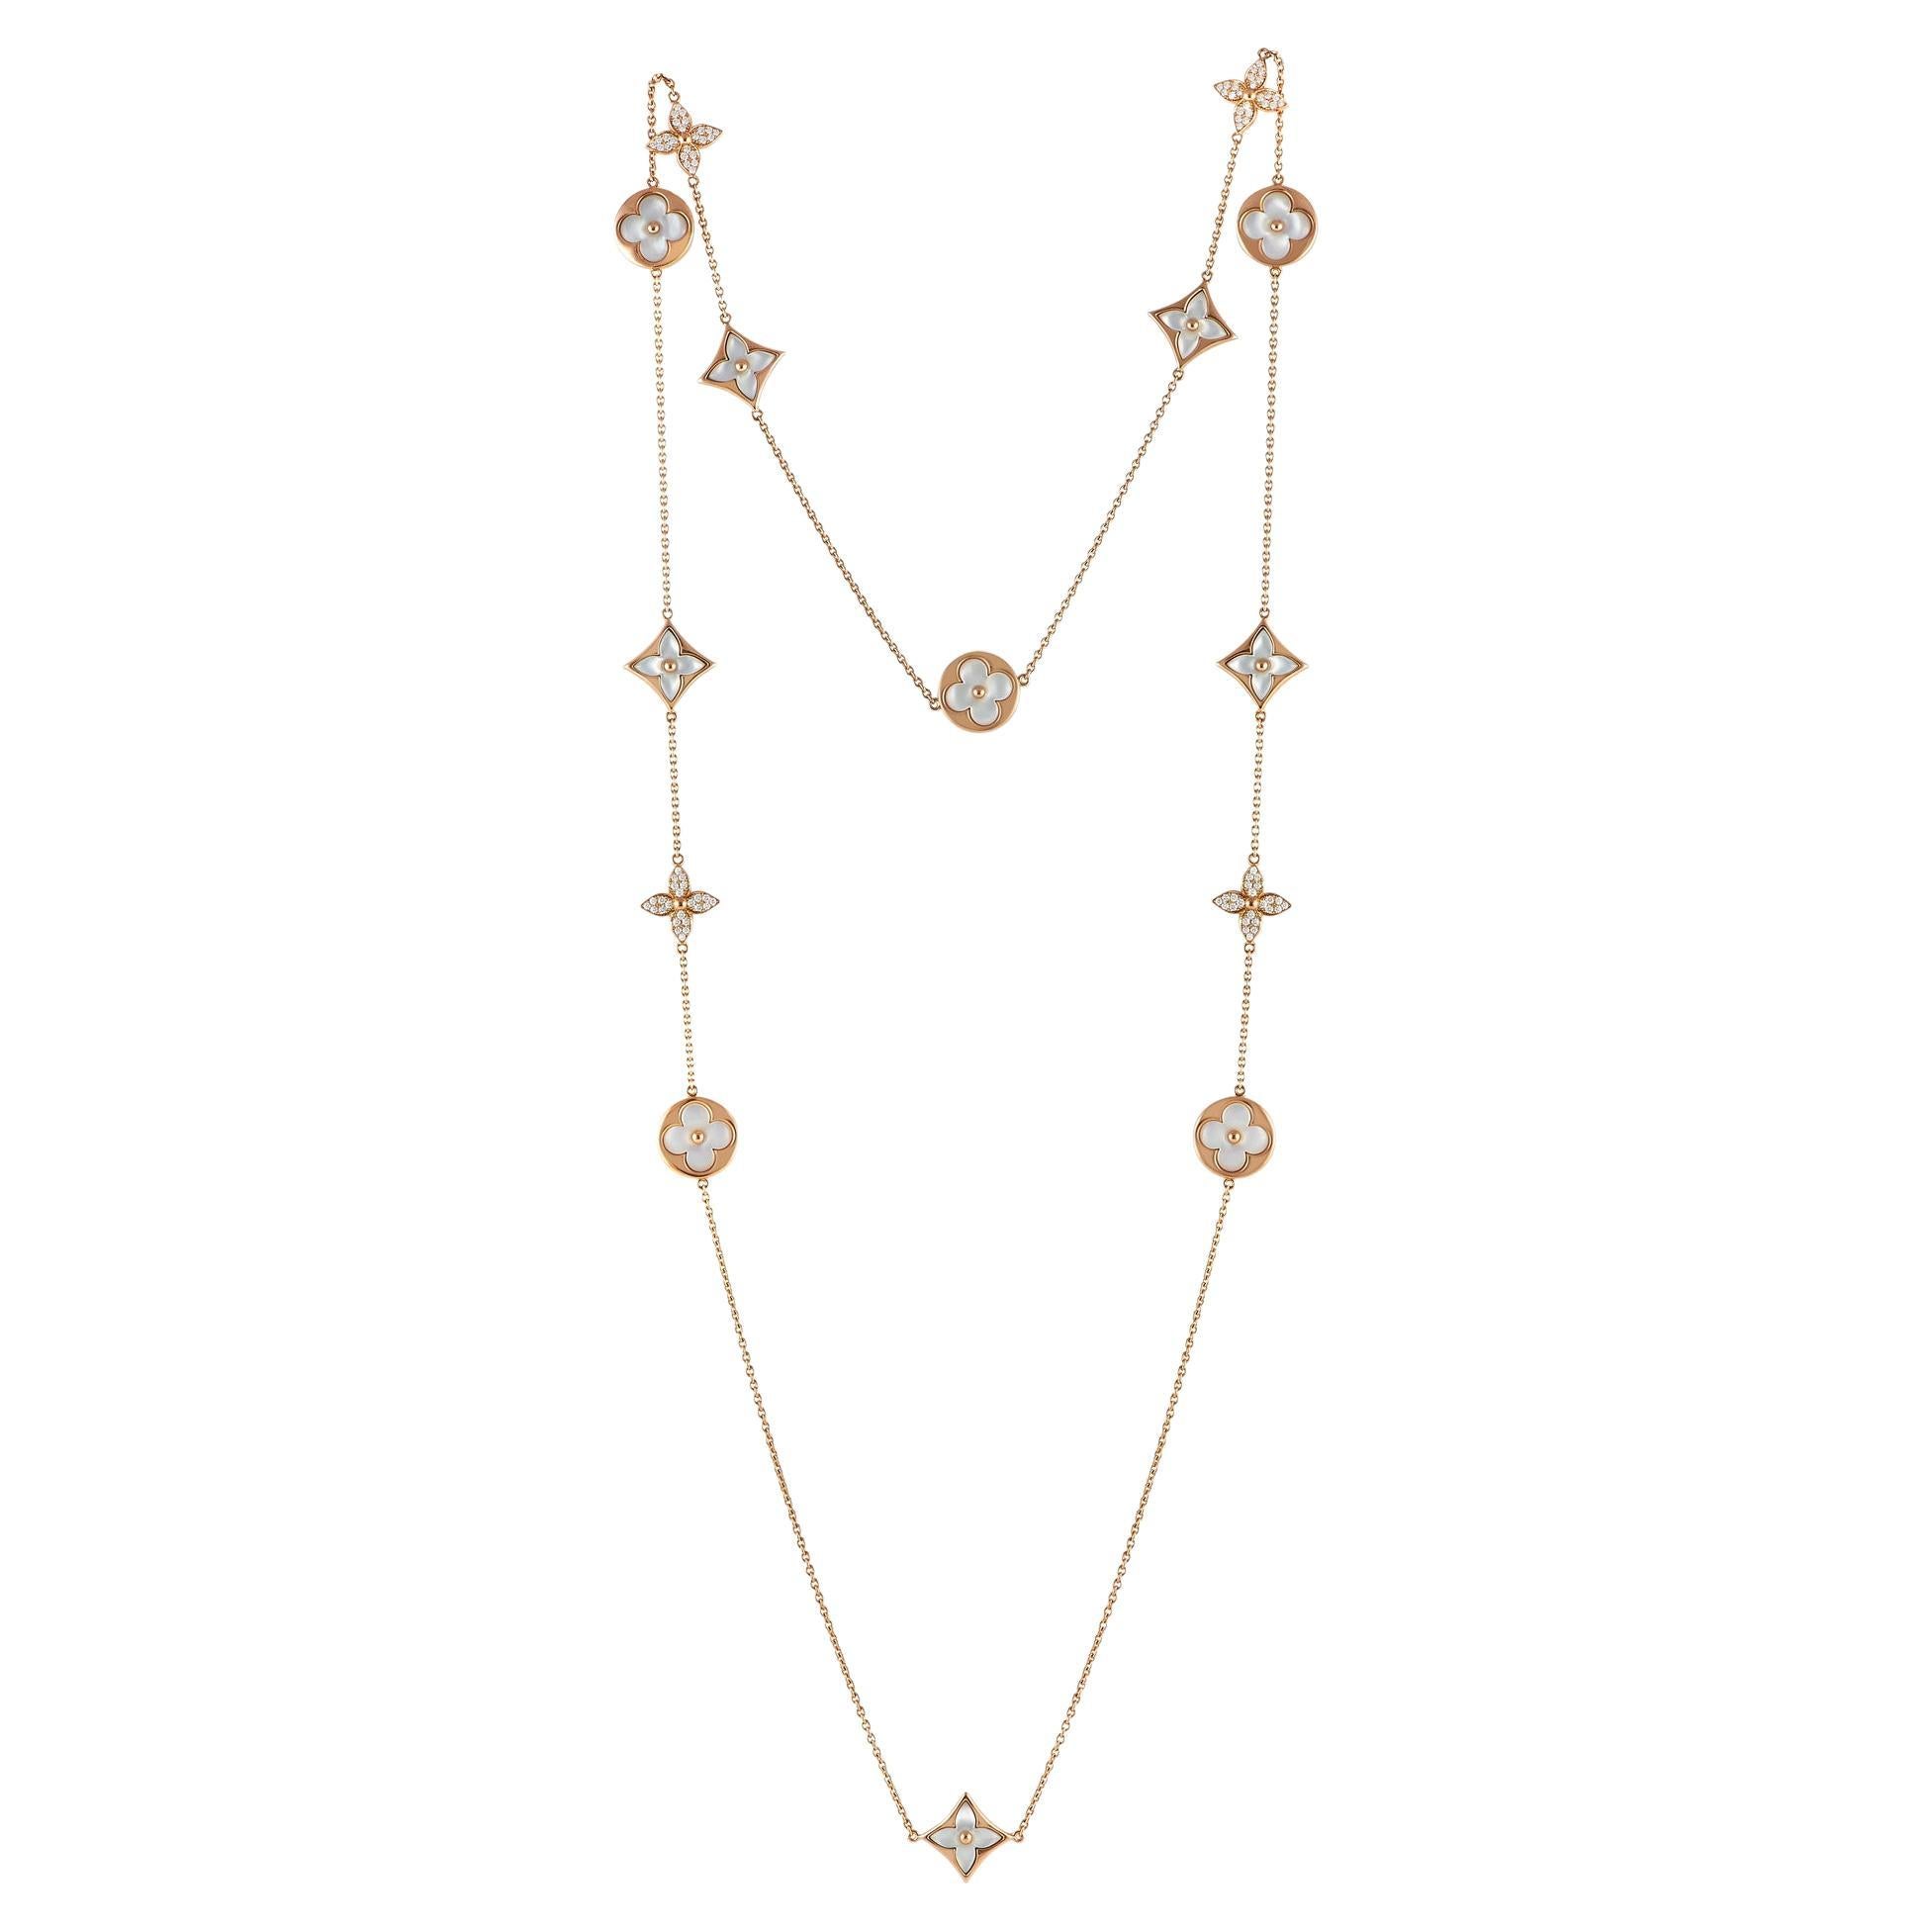 Louis Vuitton Blossom 18k Rose Gold Diamond and Mother of Pearl Sautoir  Necklace